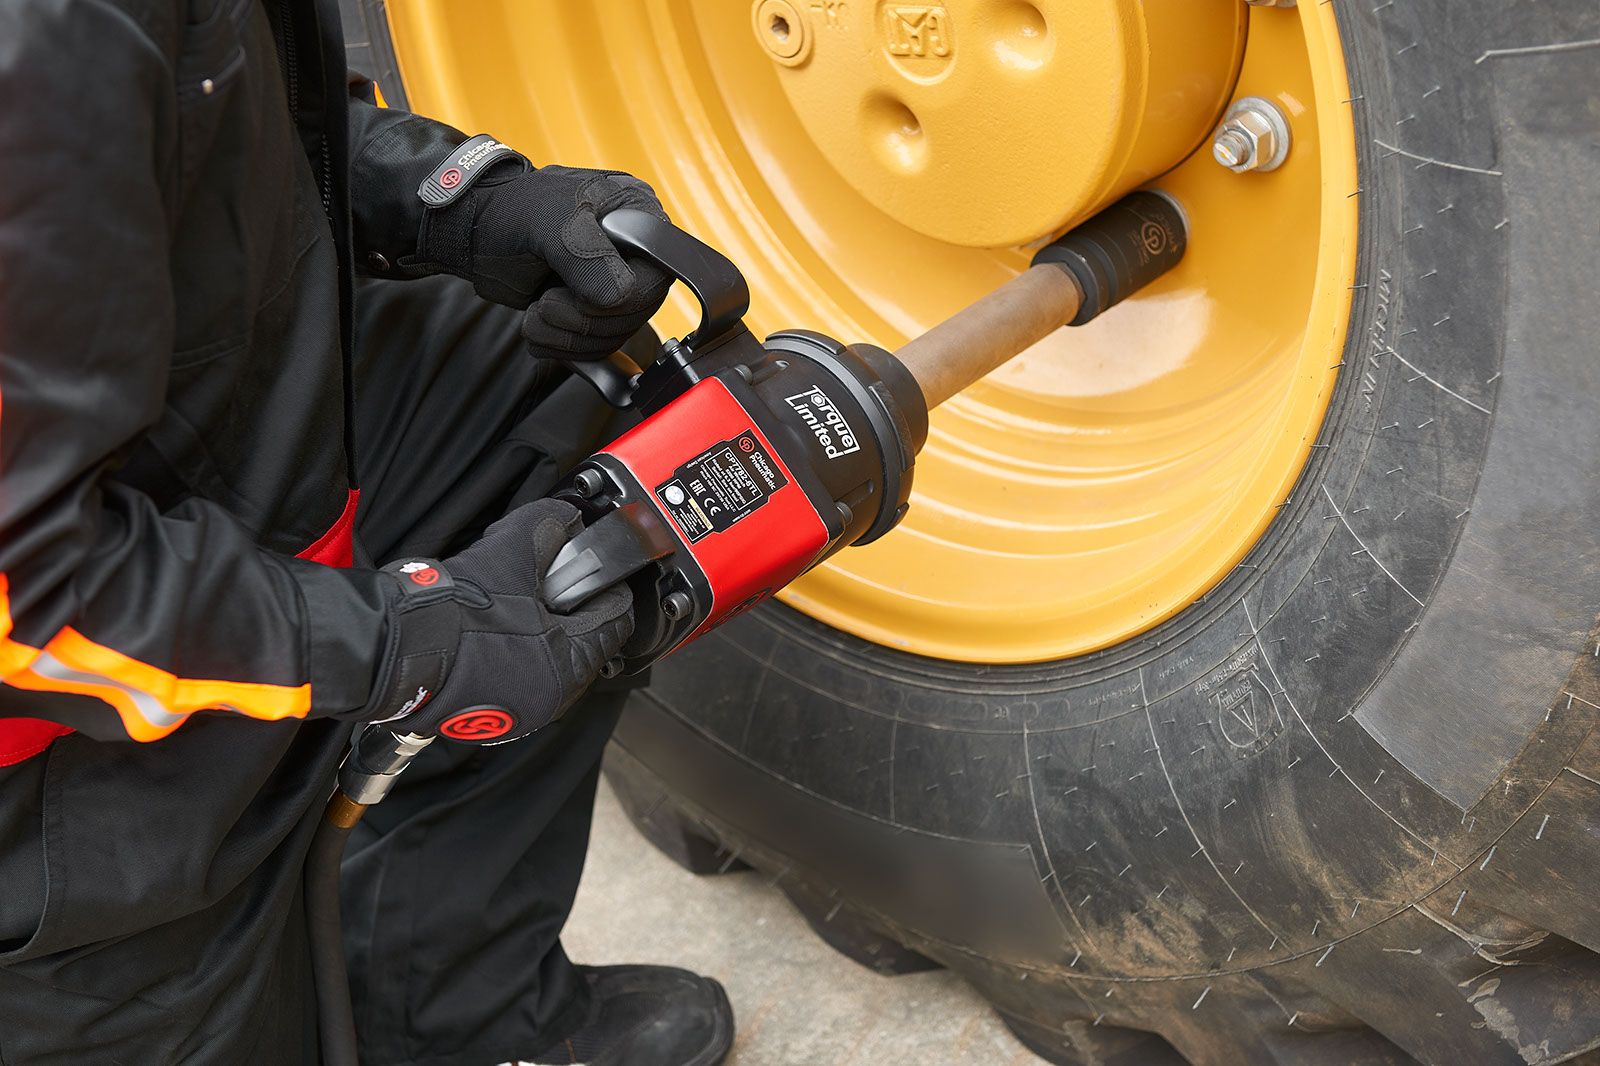 CP7782TL Series - Impact Wrenches product photo